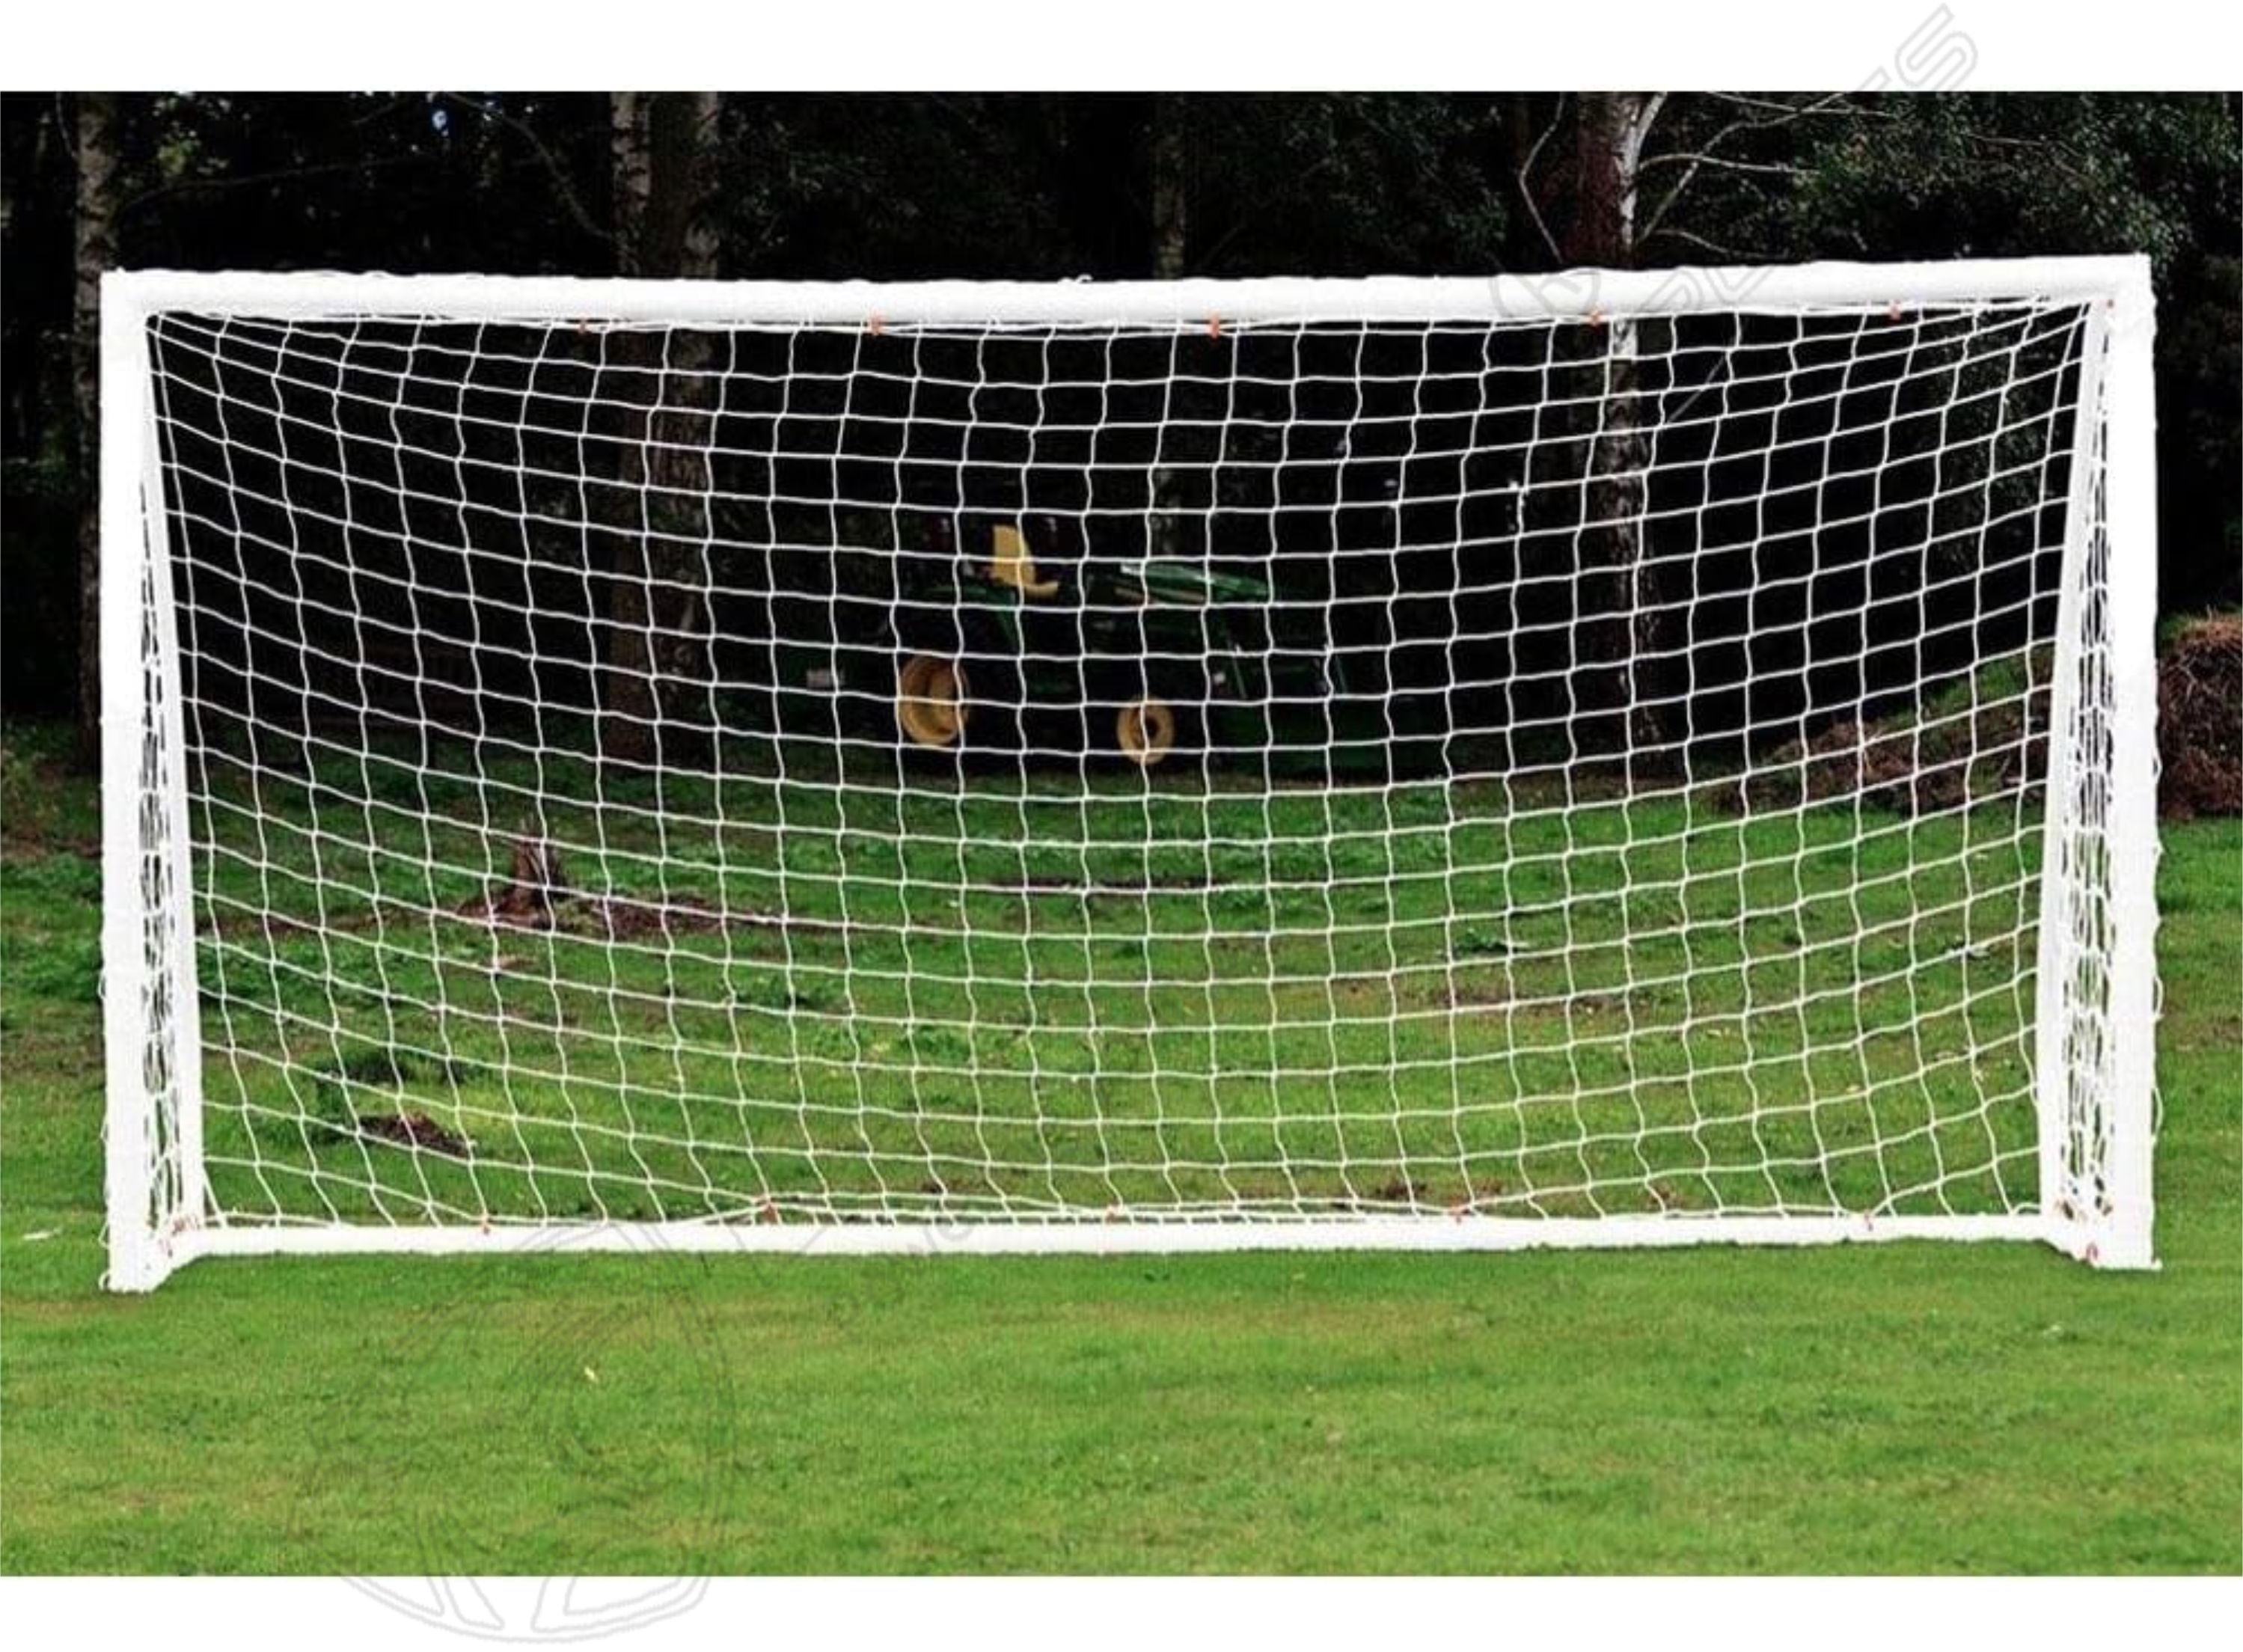  SQUARE MESH  SOCCER NET BRAIDED - OFFICIAL SIZE       '